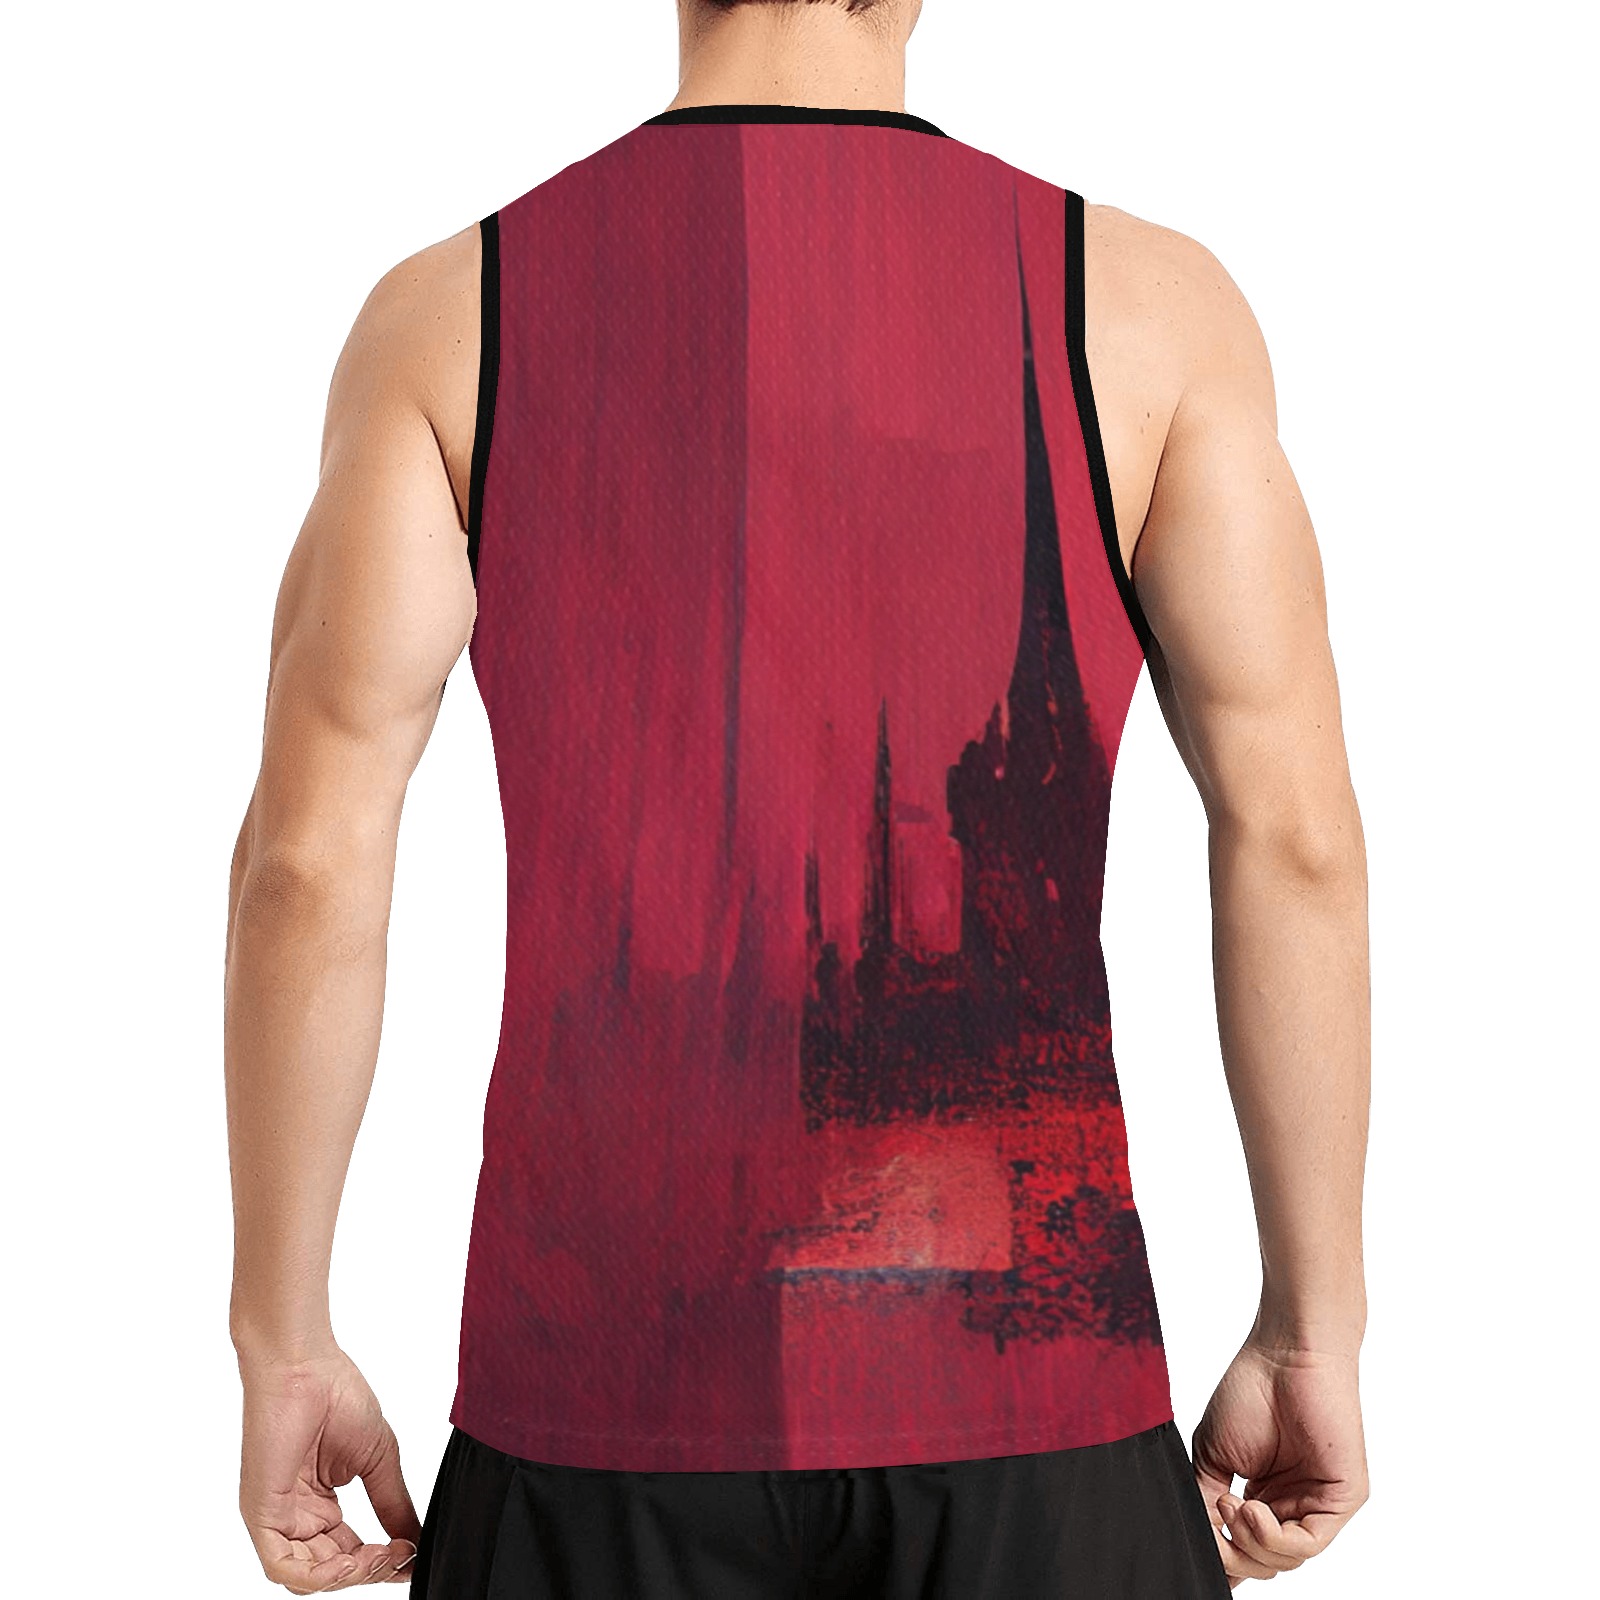 graffiti building's, red All Over Print Basketball Jersey